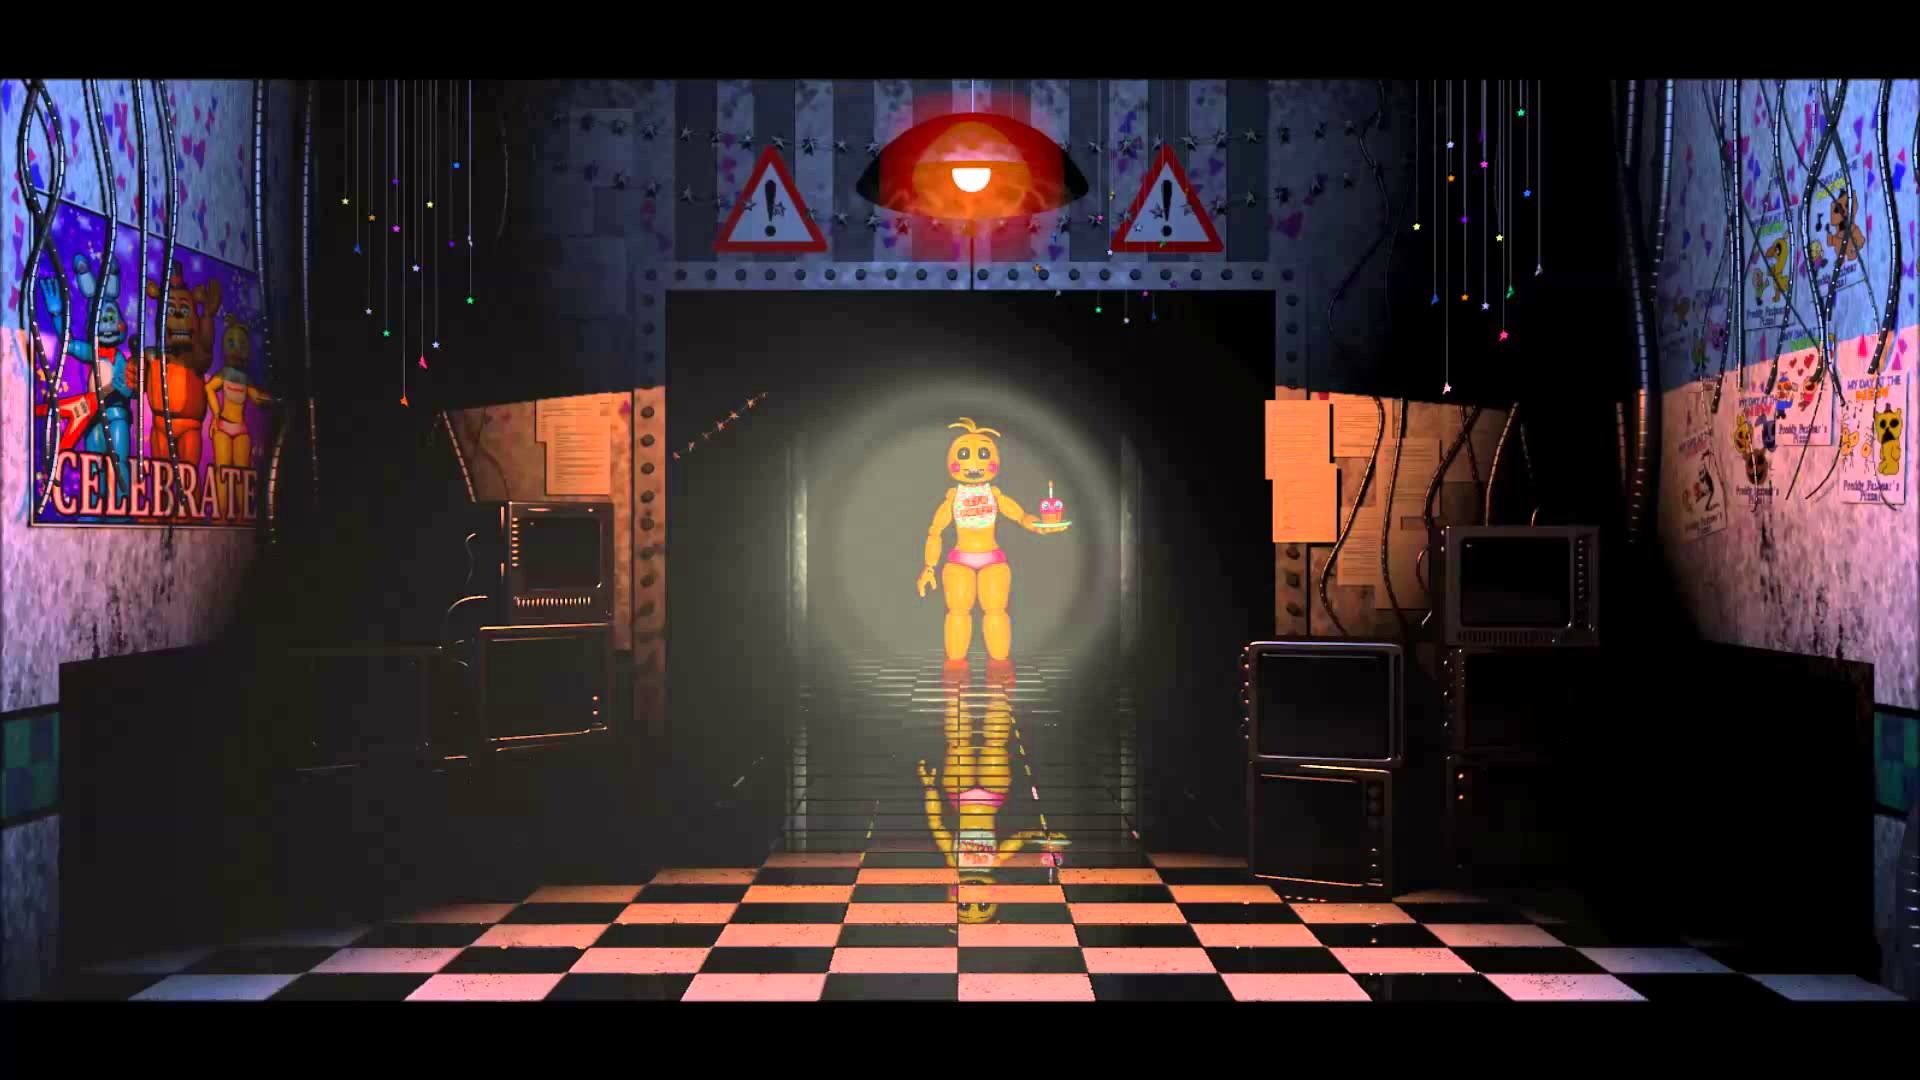 1920x1080 Five nights at freddys (What if: Toy Chica sung the fnaf song) - YouTube